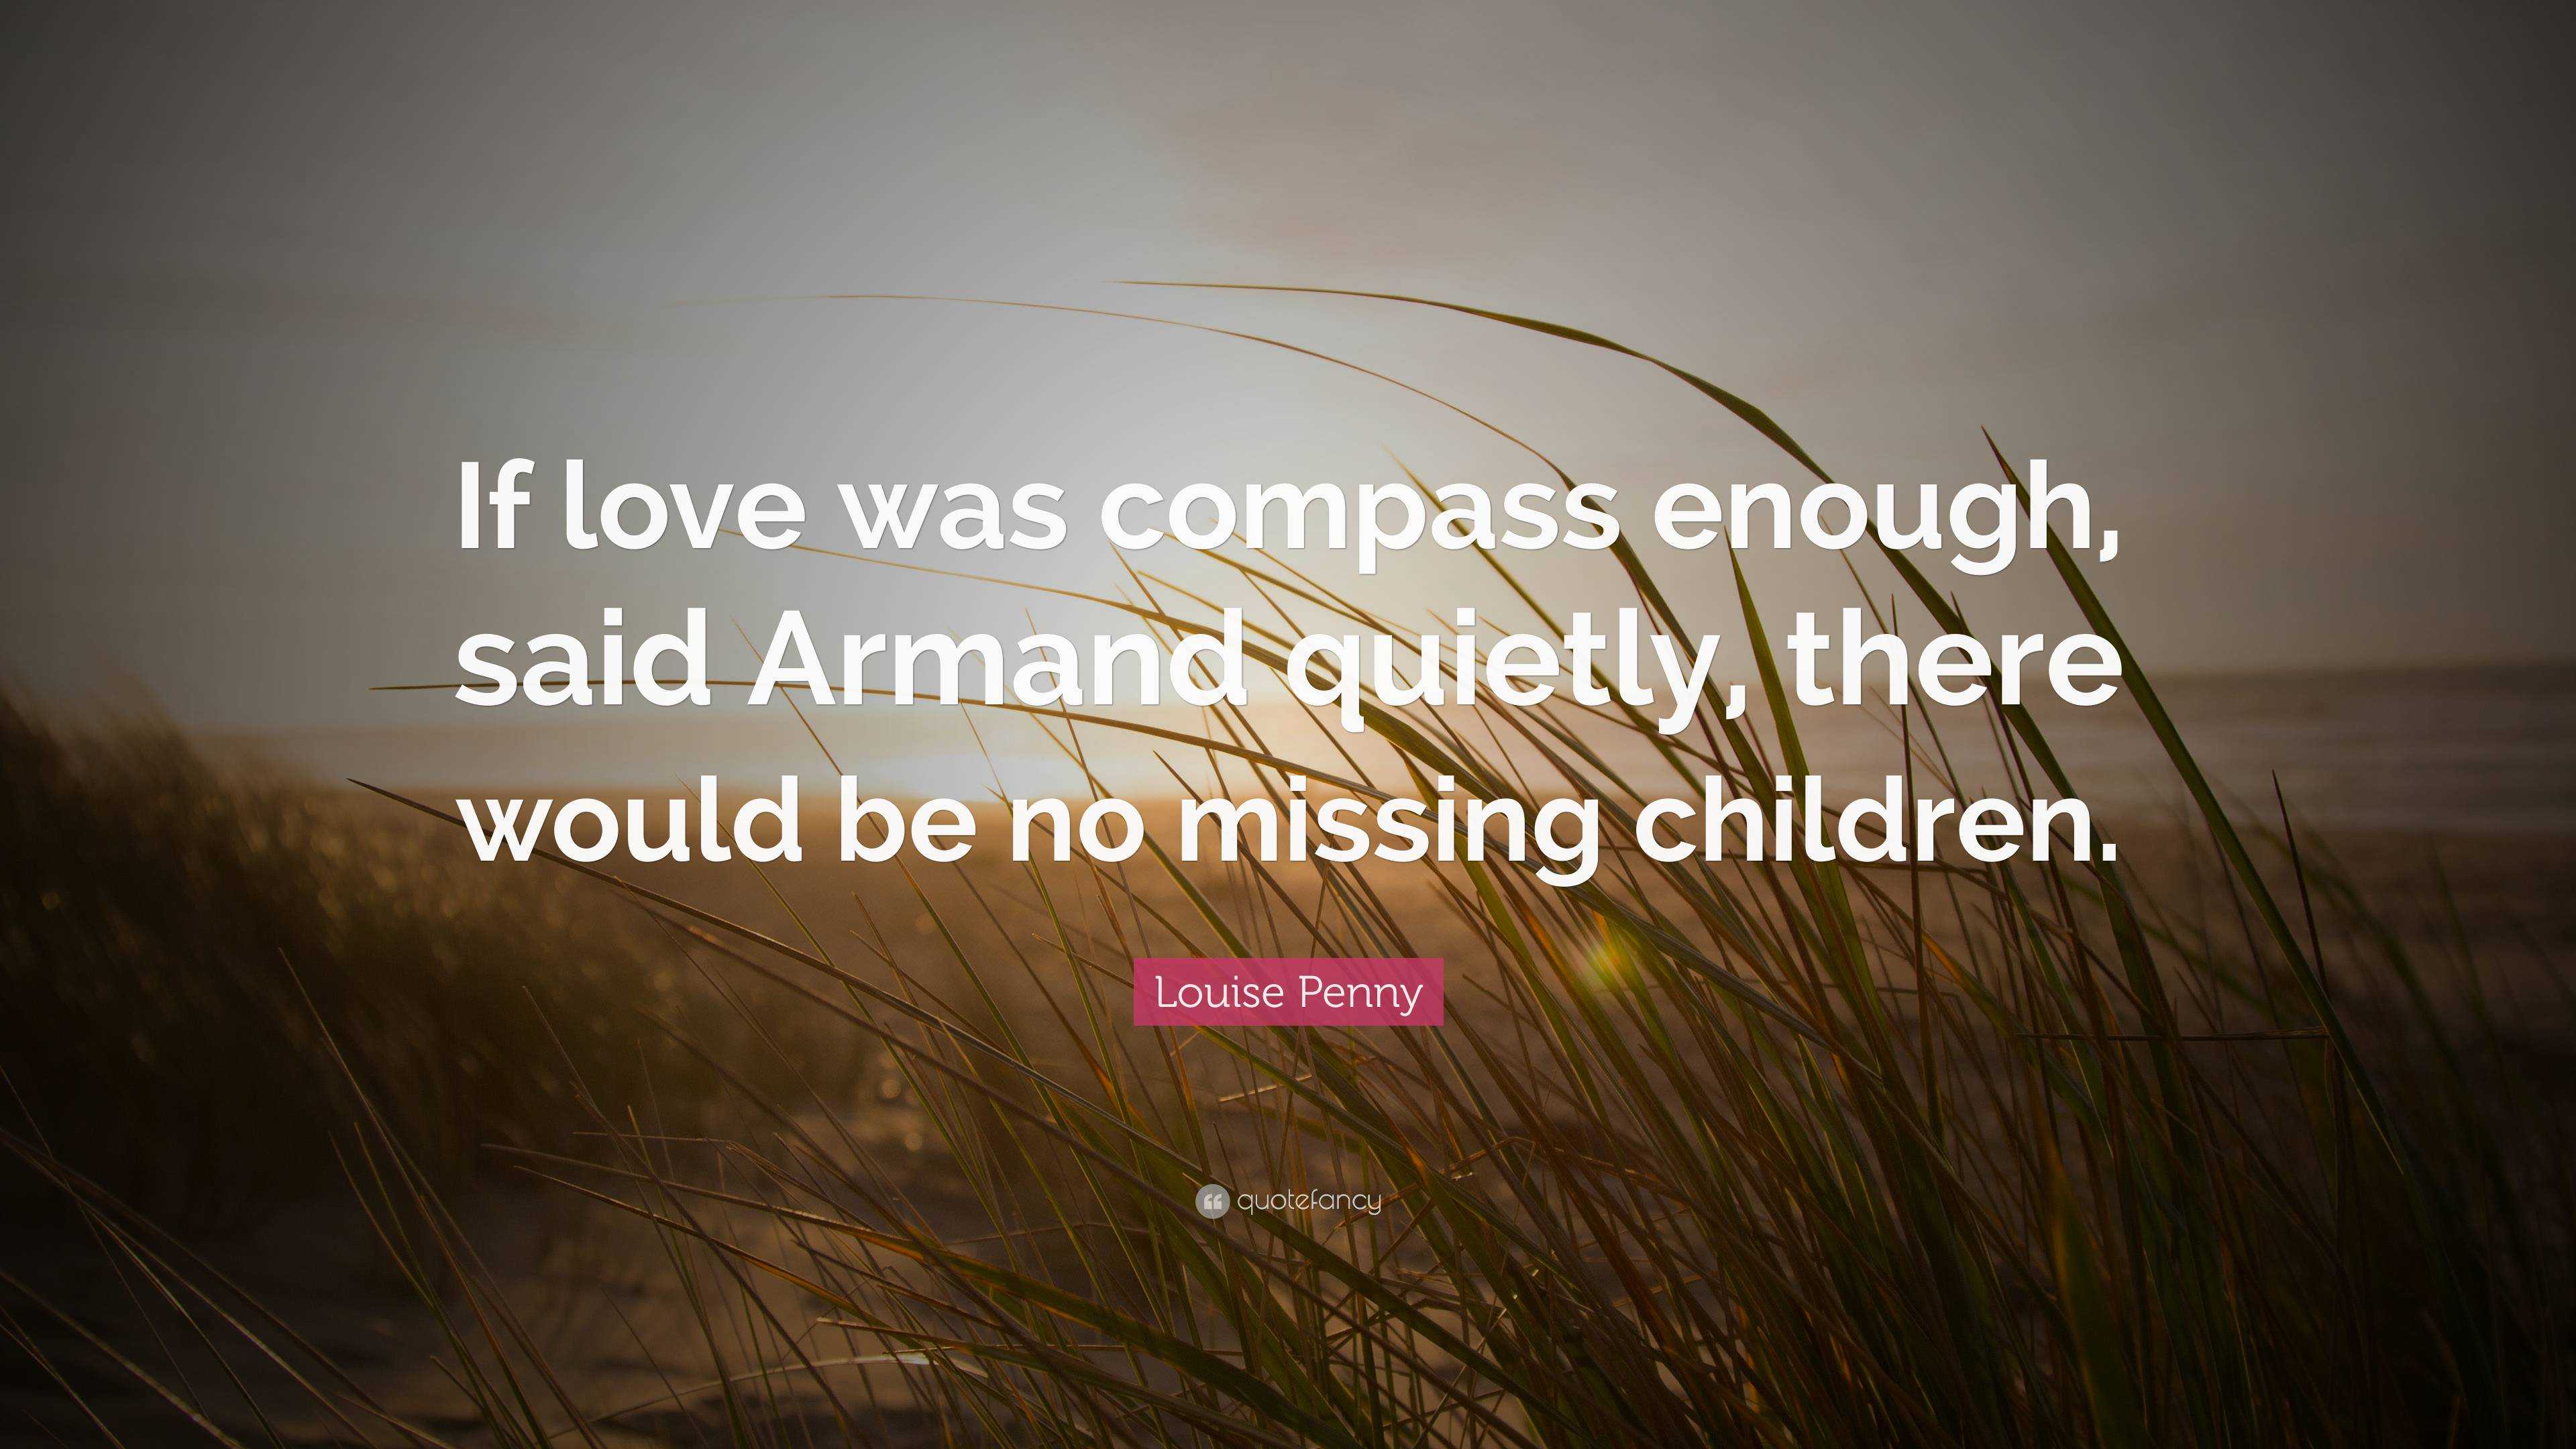 Louise Penny Quote “if Love Was Compass Enough Said Armand Quietly There Would Be No Missing